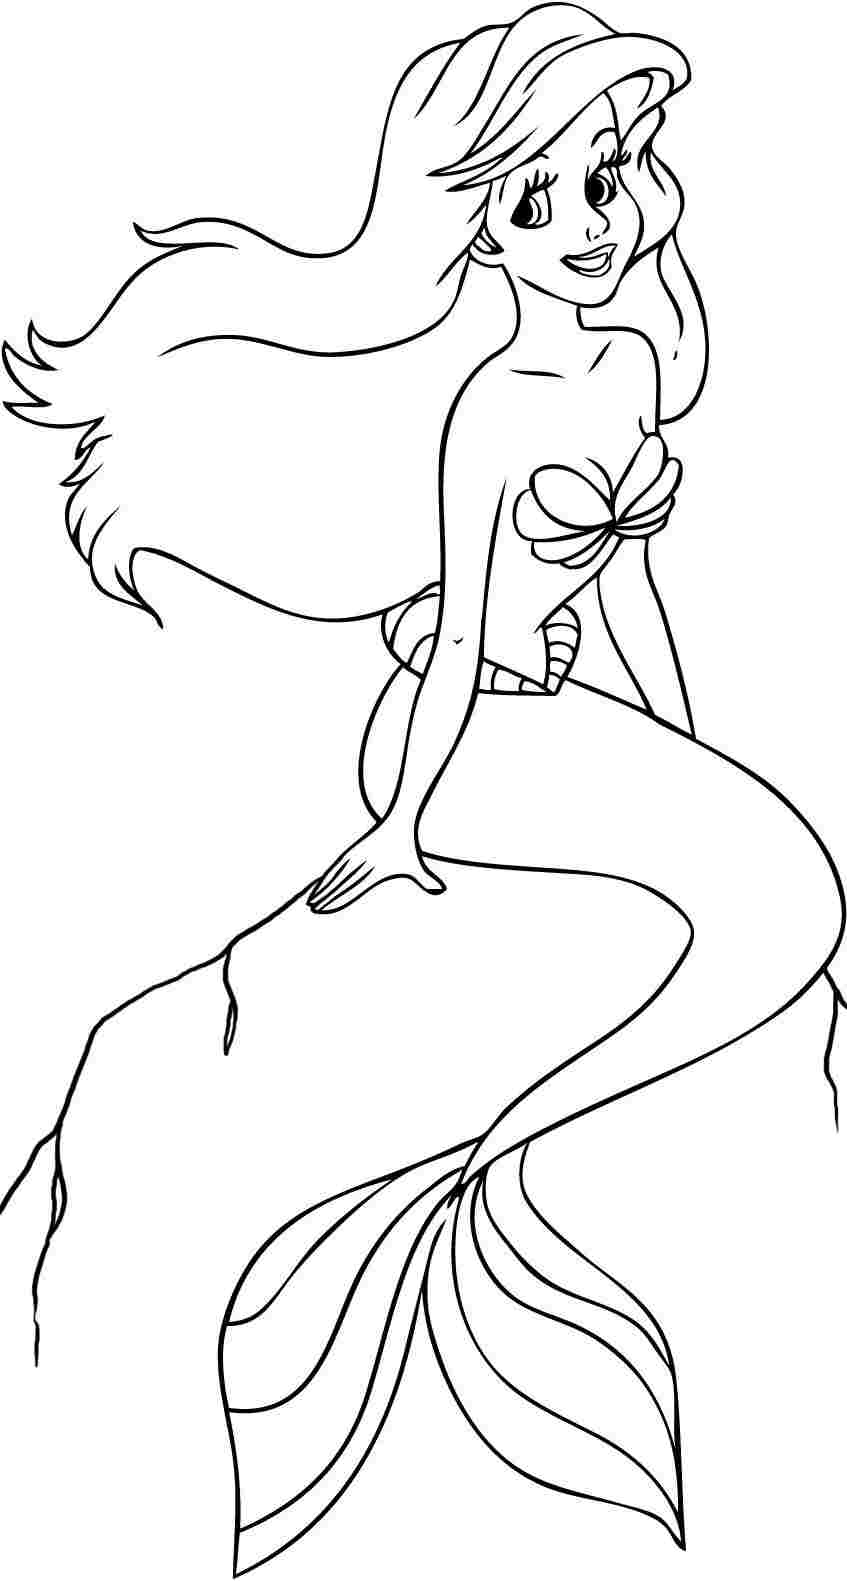 Ariel's Mom Coloring Pages - Coloring Pages For All Ages